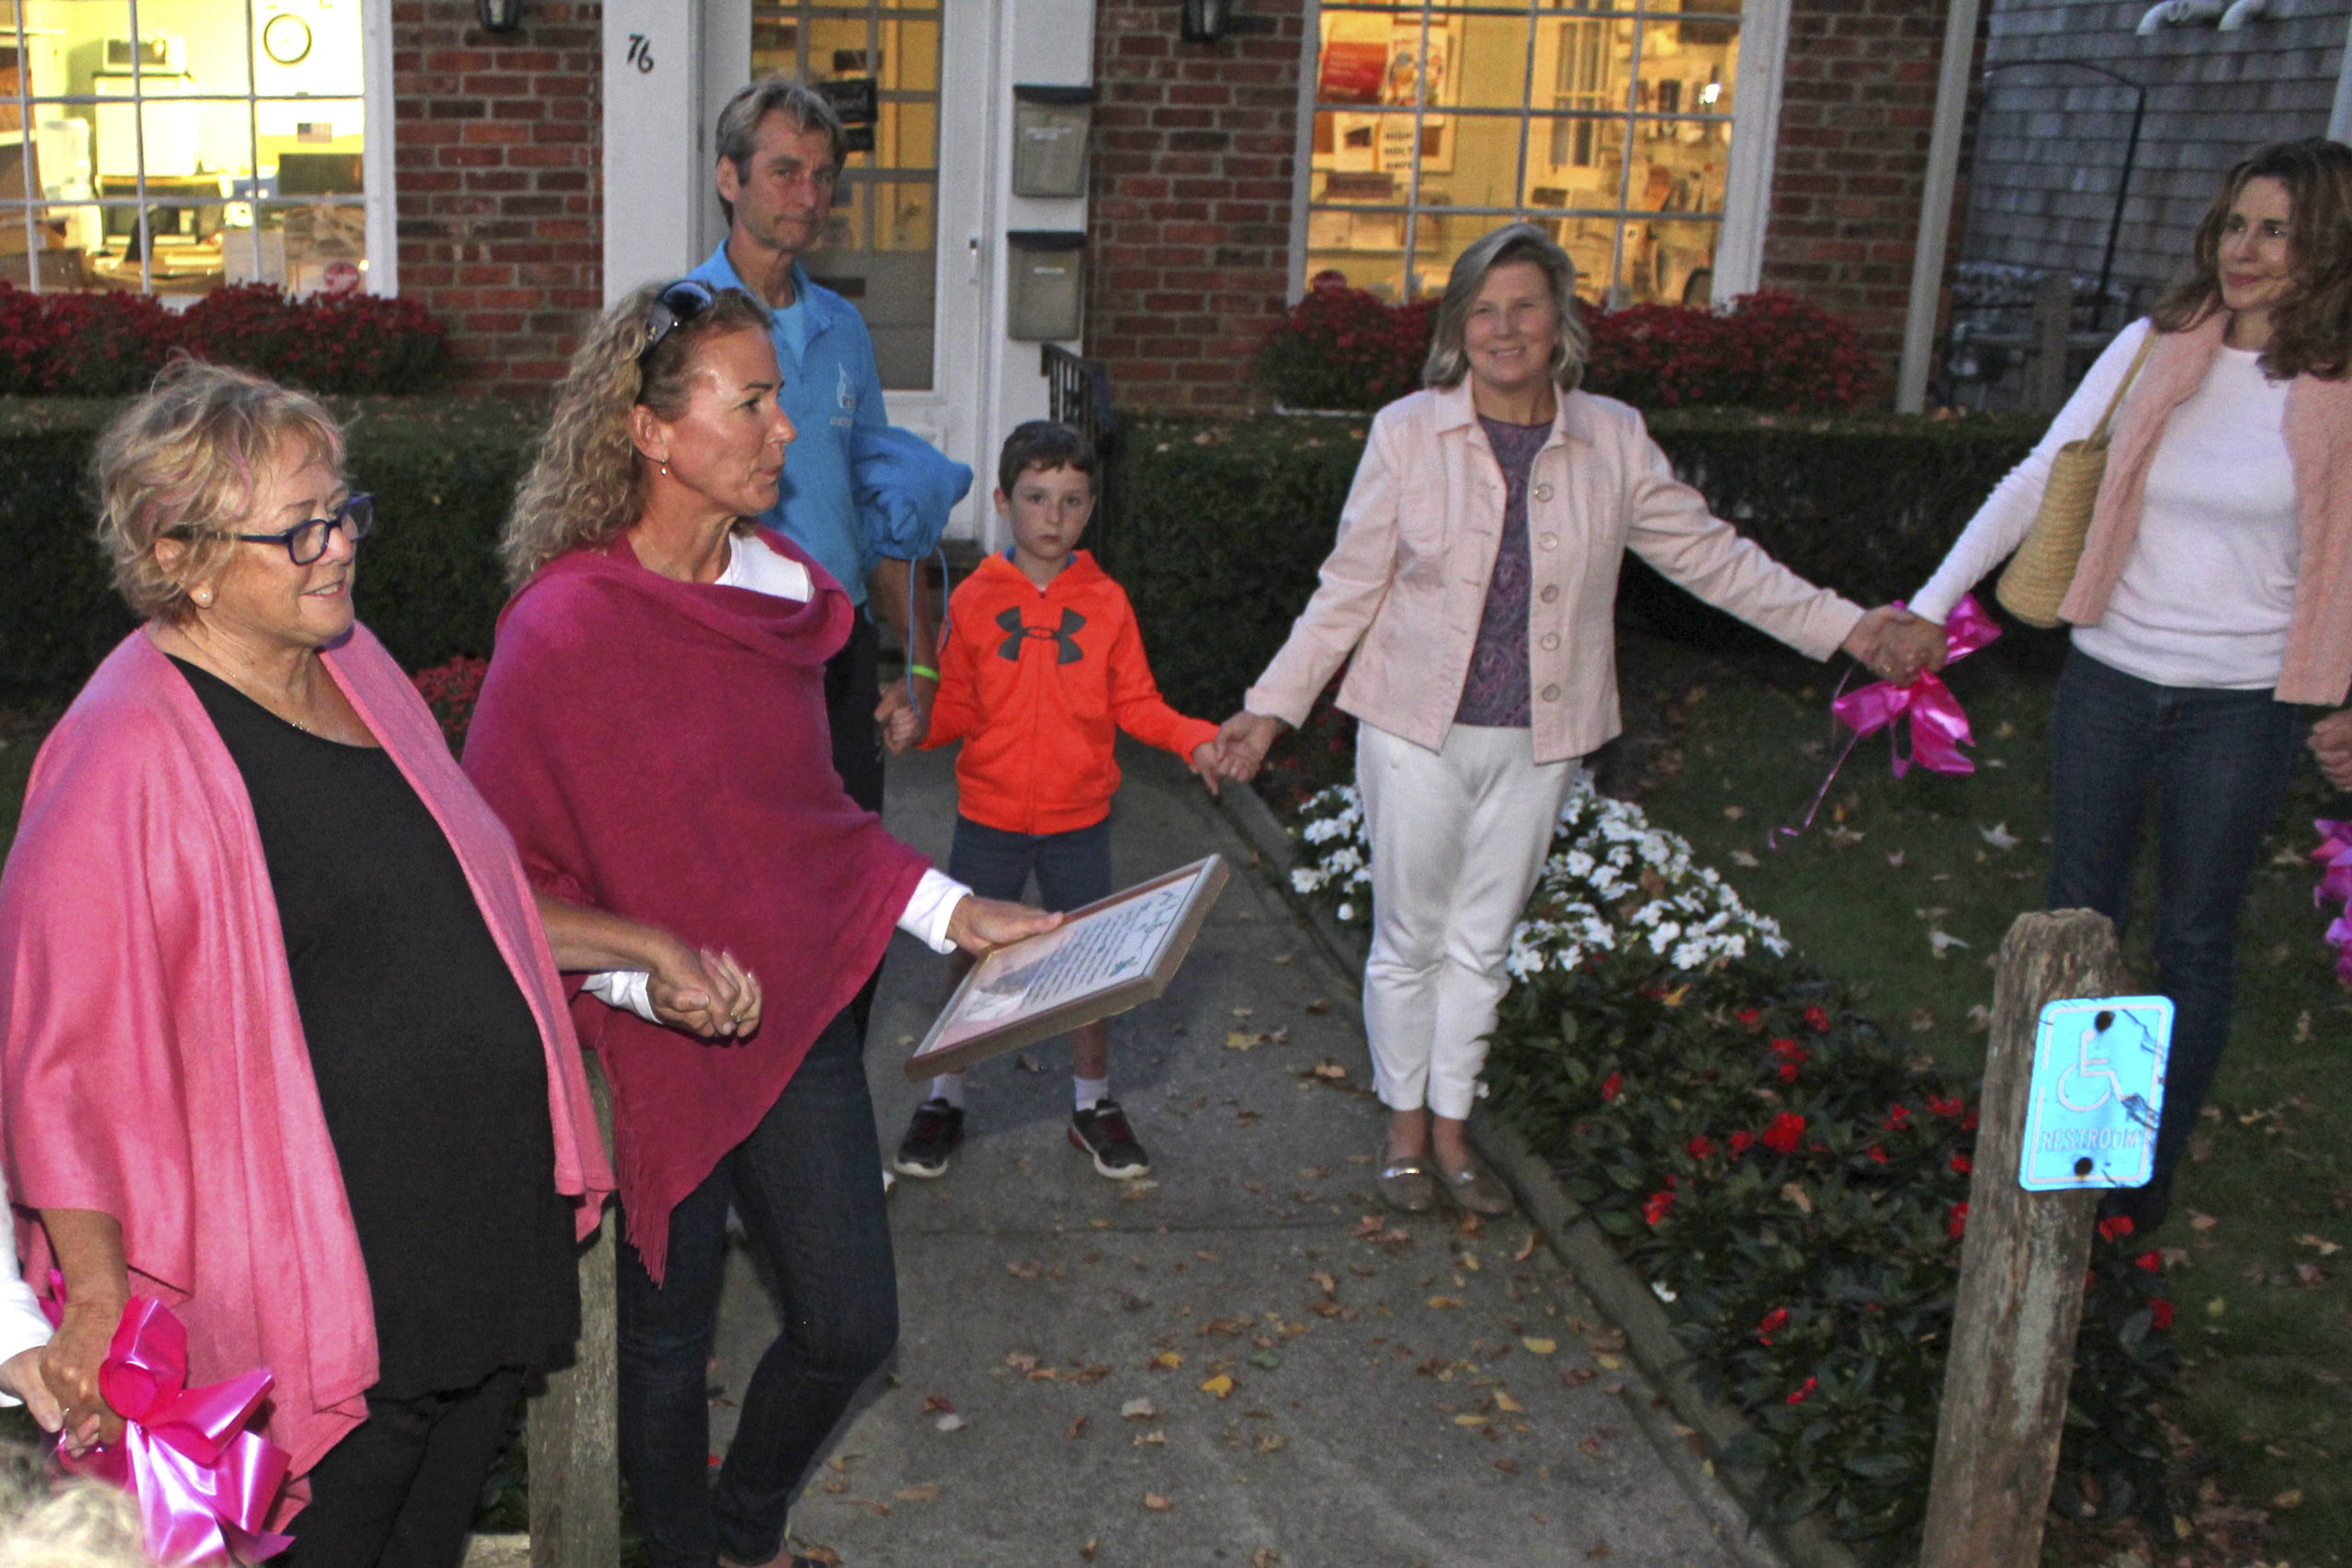 Susie Roden, far left, at the lighting of the pink tree for Breast Cancer Awareness Month in October of 2019.